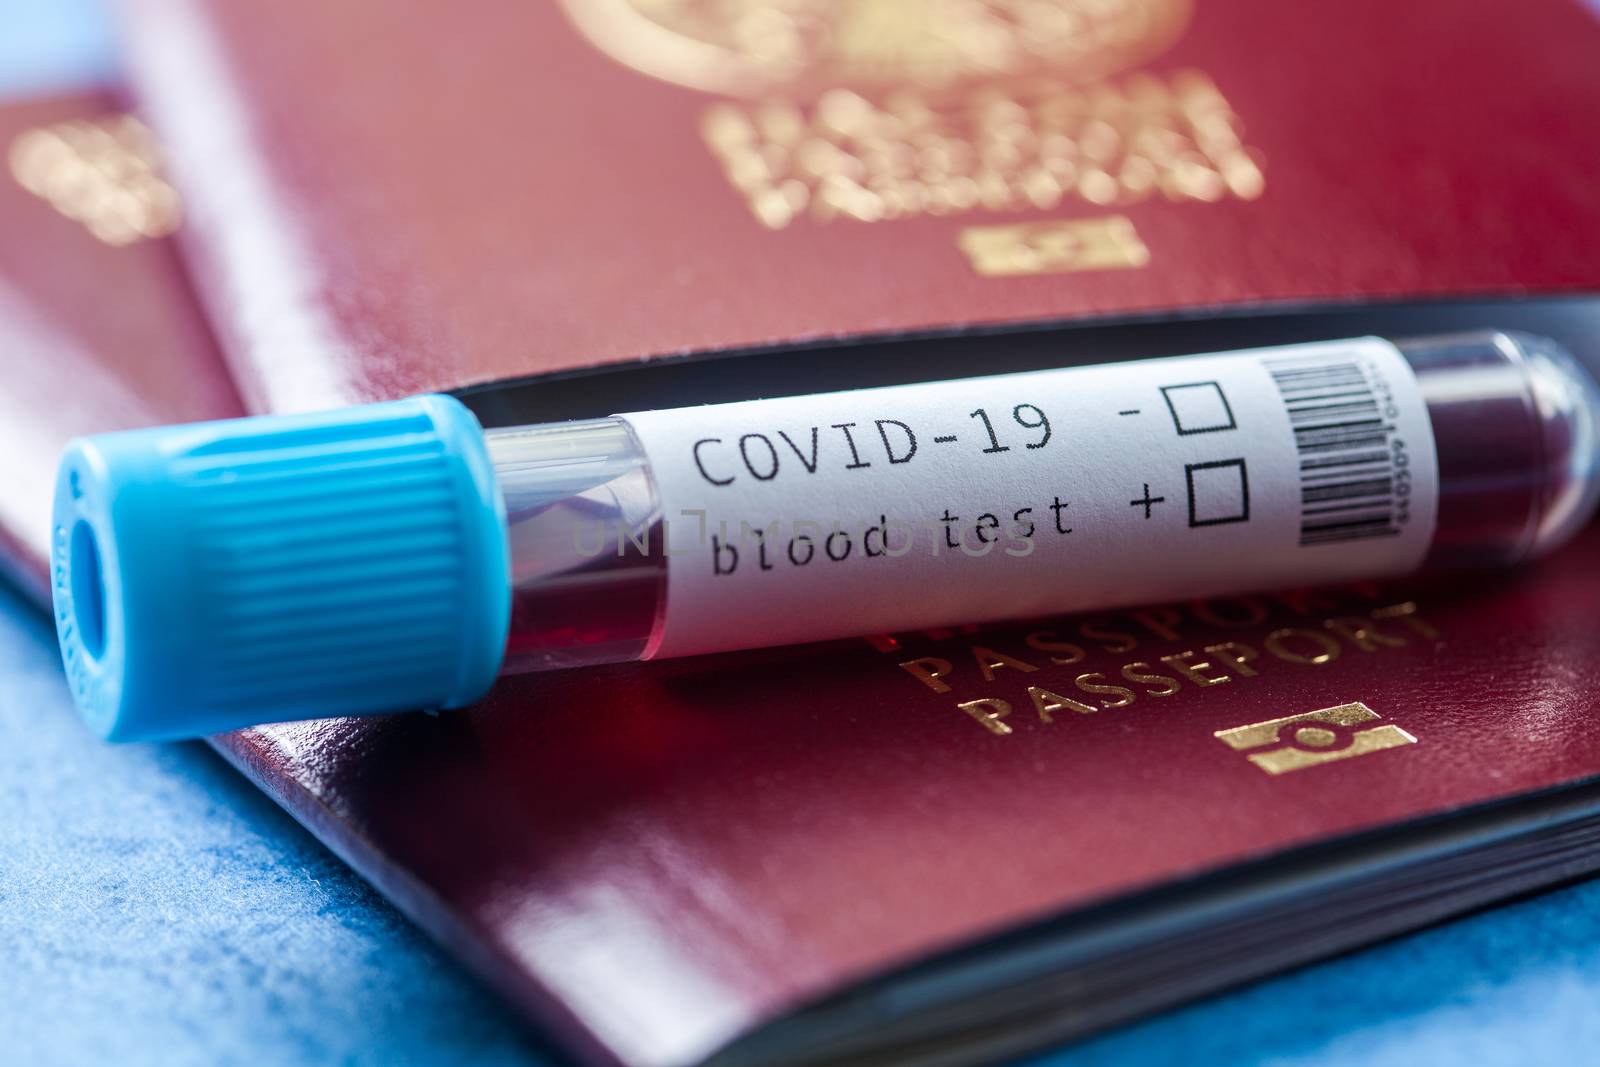 COVID-19 test tube and red passport,passenger blood test at point of arrival concept,travel restrictions due to Coronavirus global pandemic outbreak,prevention of virus spread transmission or transfer